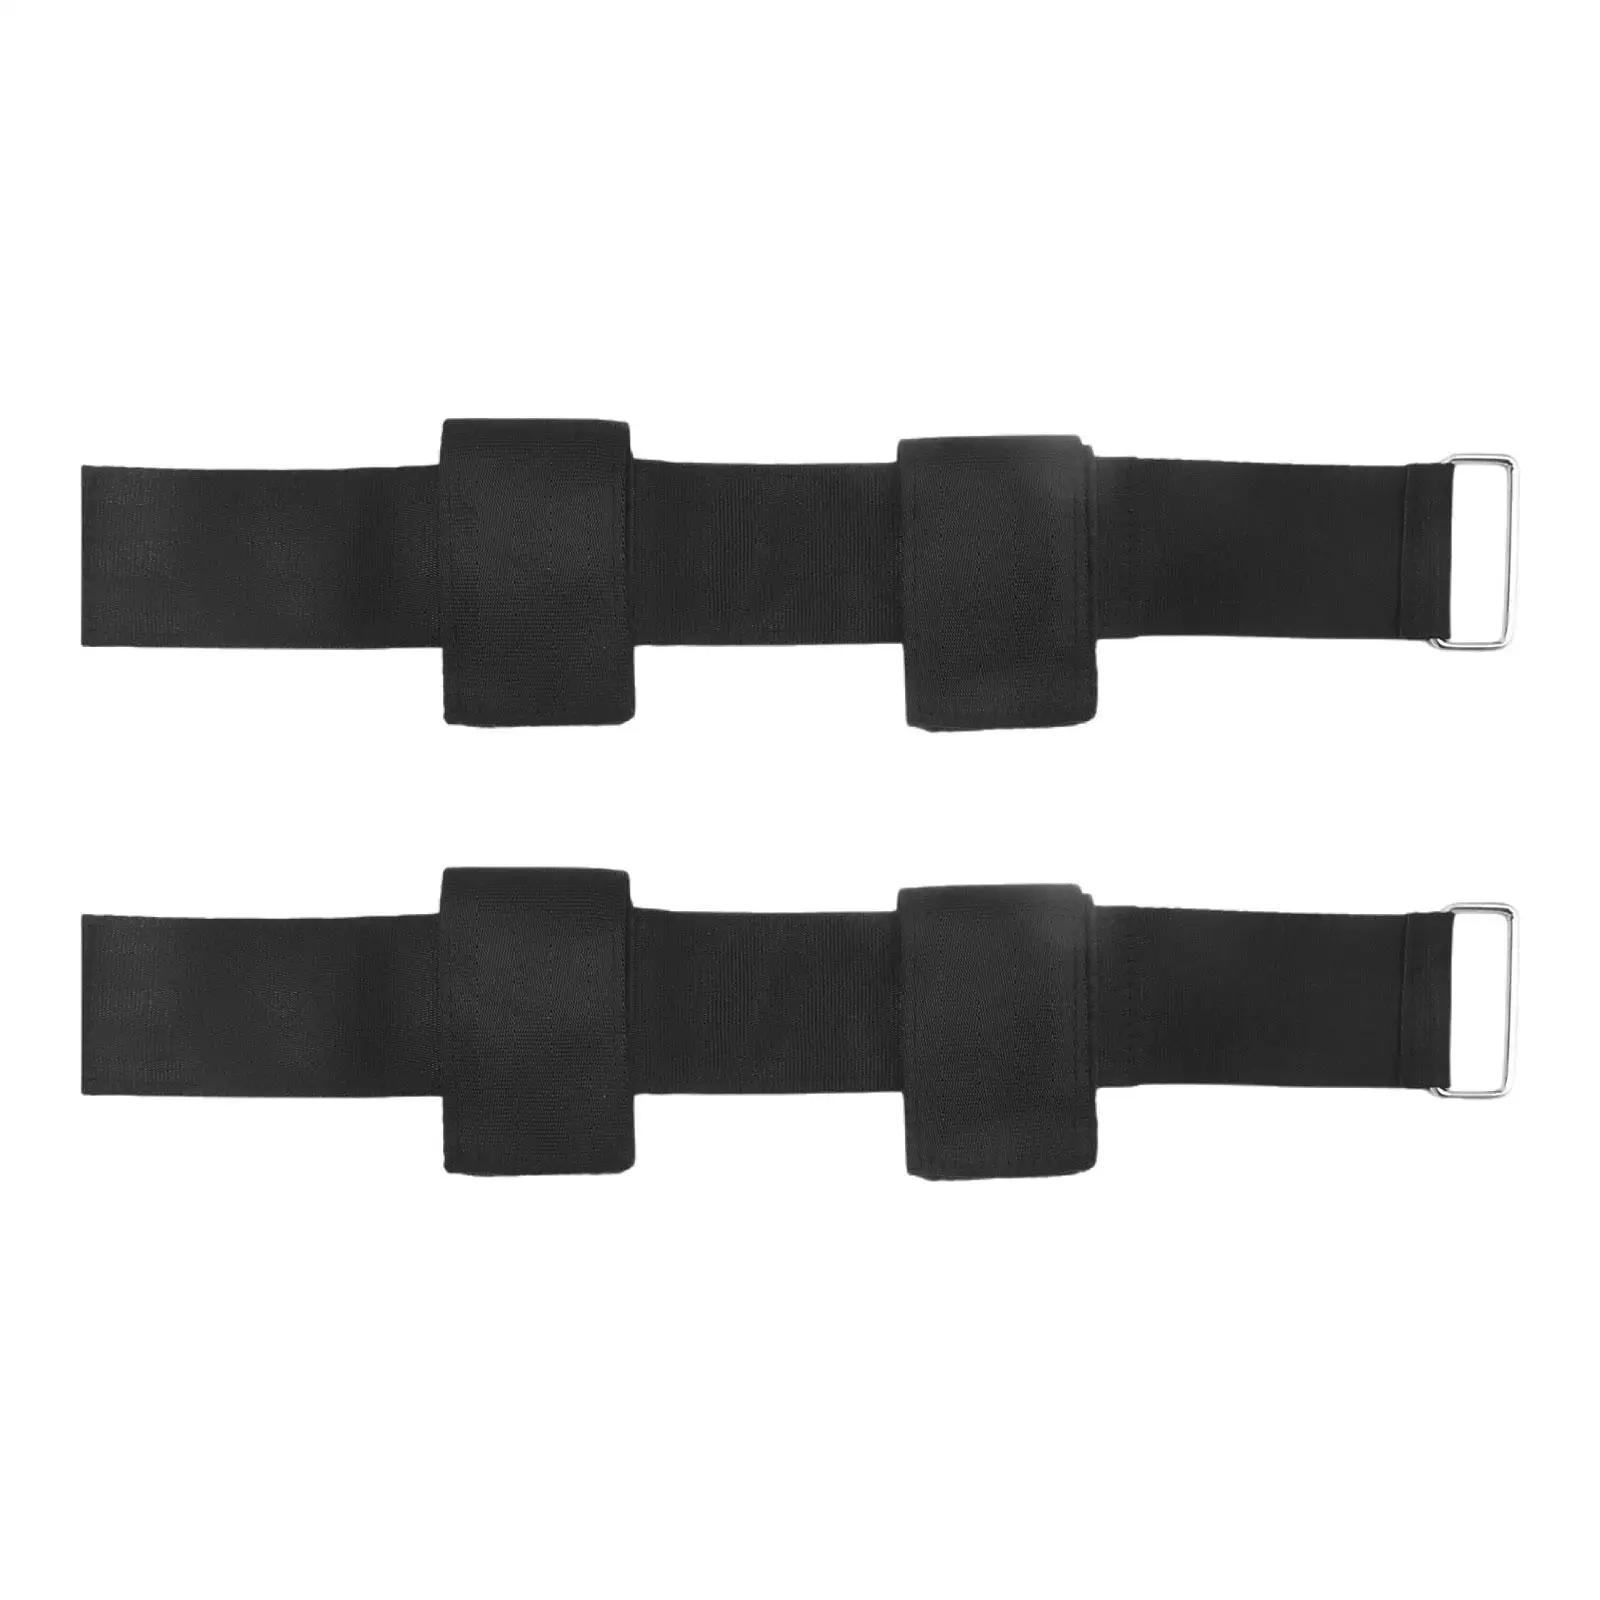 2 Pieces Dumbbell Foot Straps Lower Body Strength Training Leg